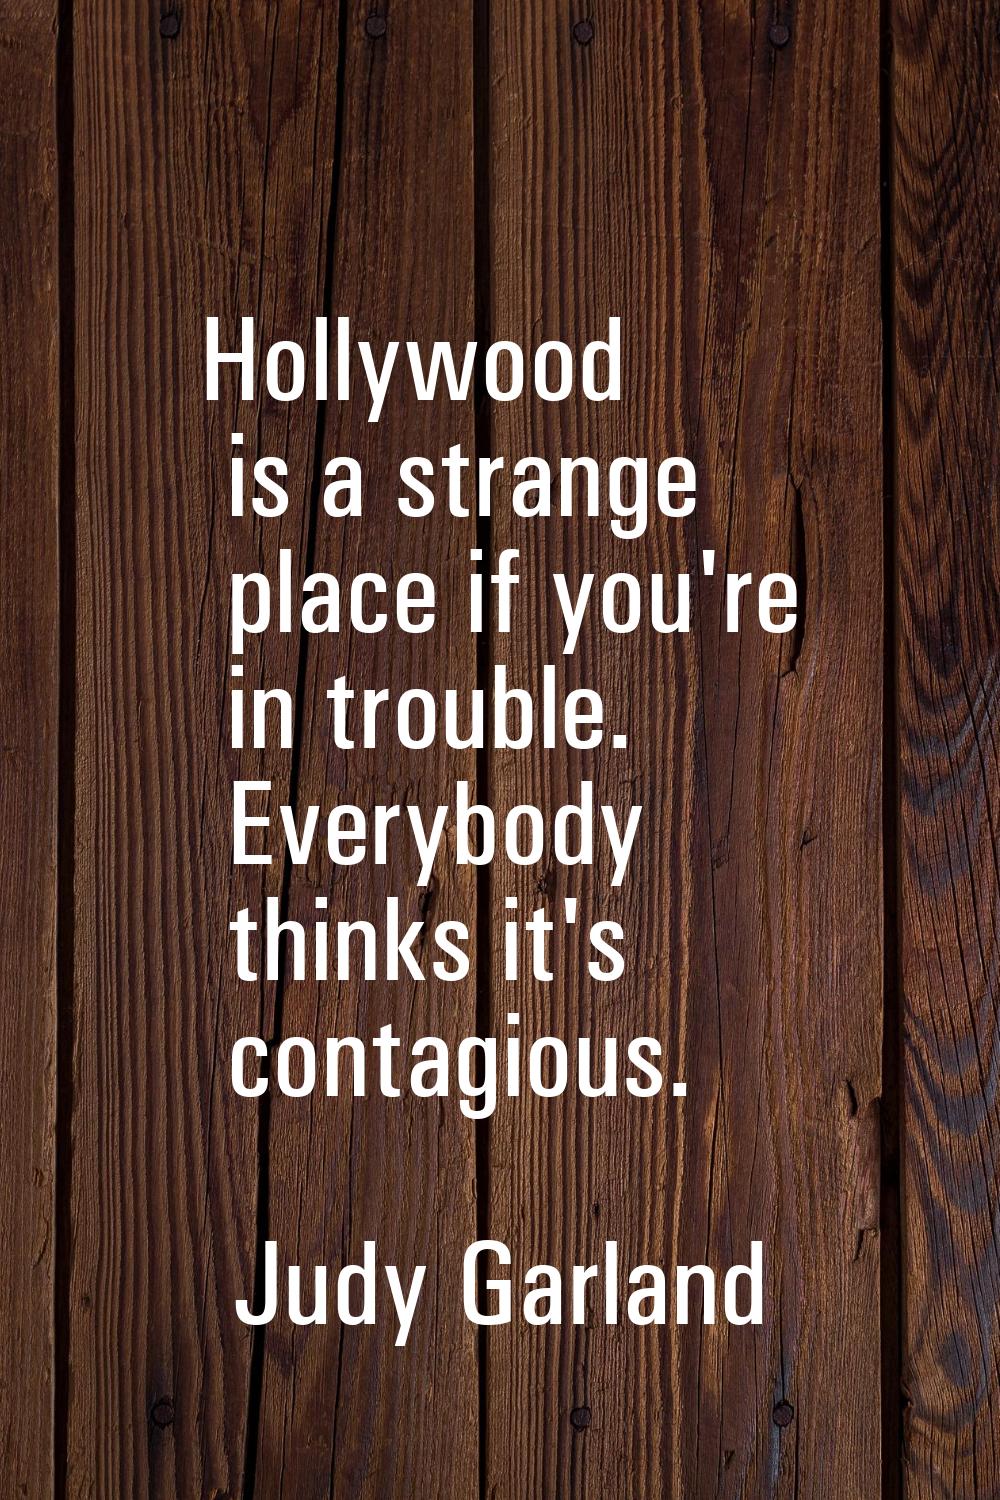 Hollywood is a strange place if you're in trouble. Everybody thinks it's contagious.